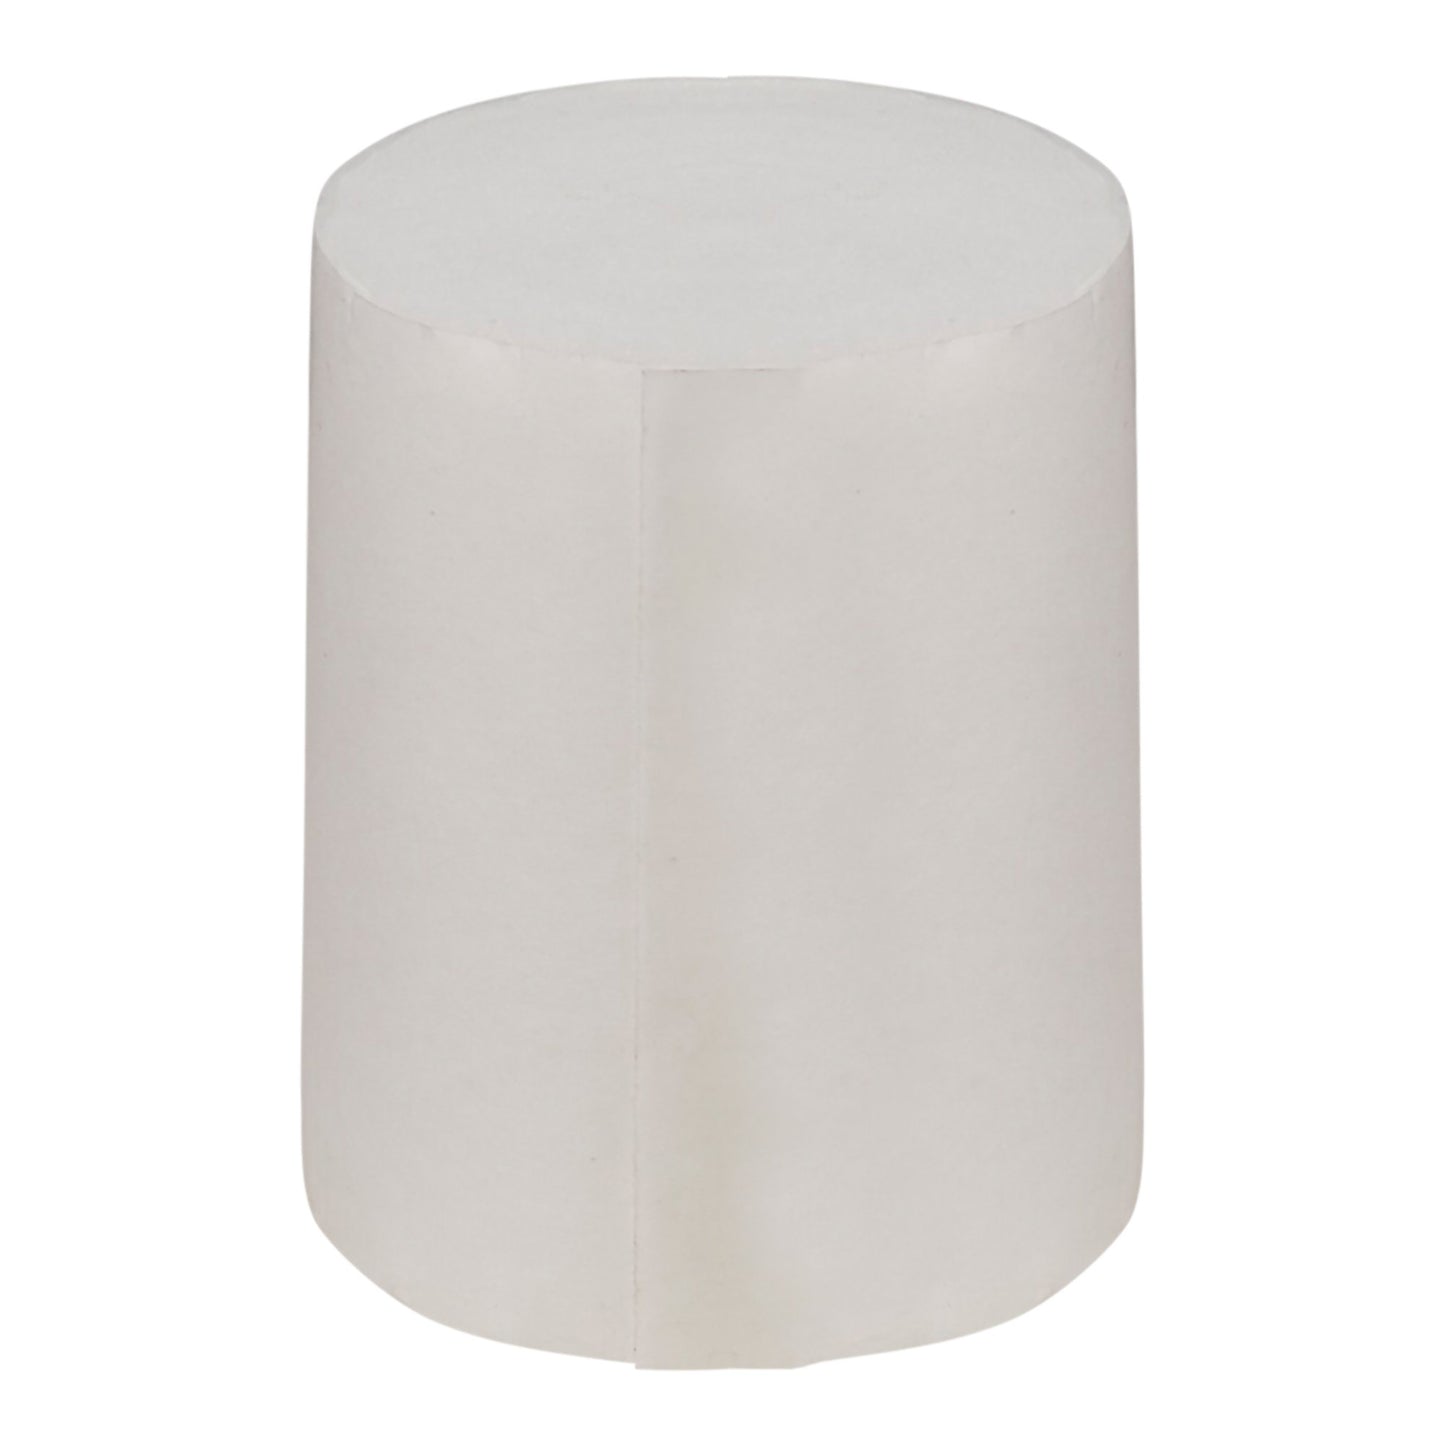 3M™ Synthetic White Polyester Undercast Cast Padding, 3 Inch X 4 Yard, Sold As 80/Case 3M Cmw03